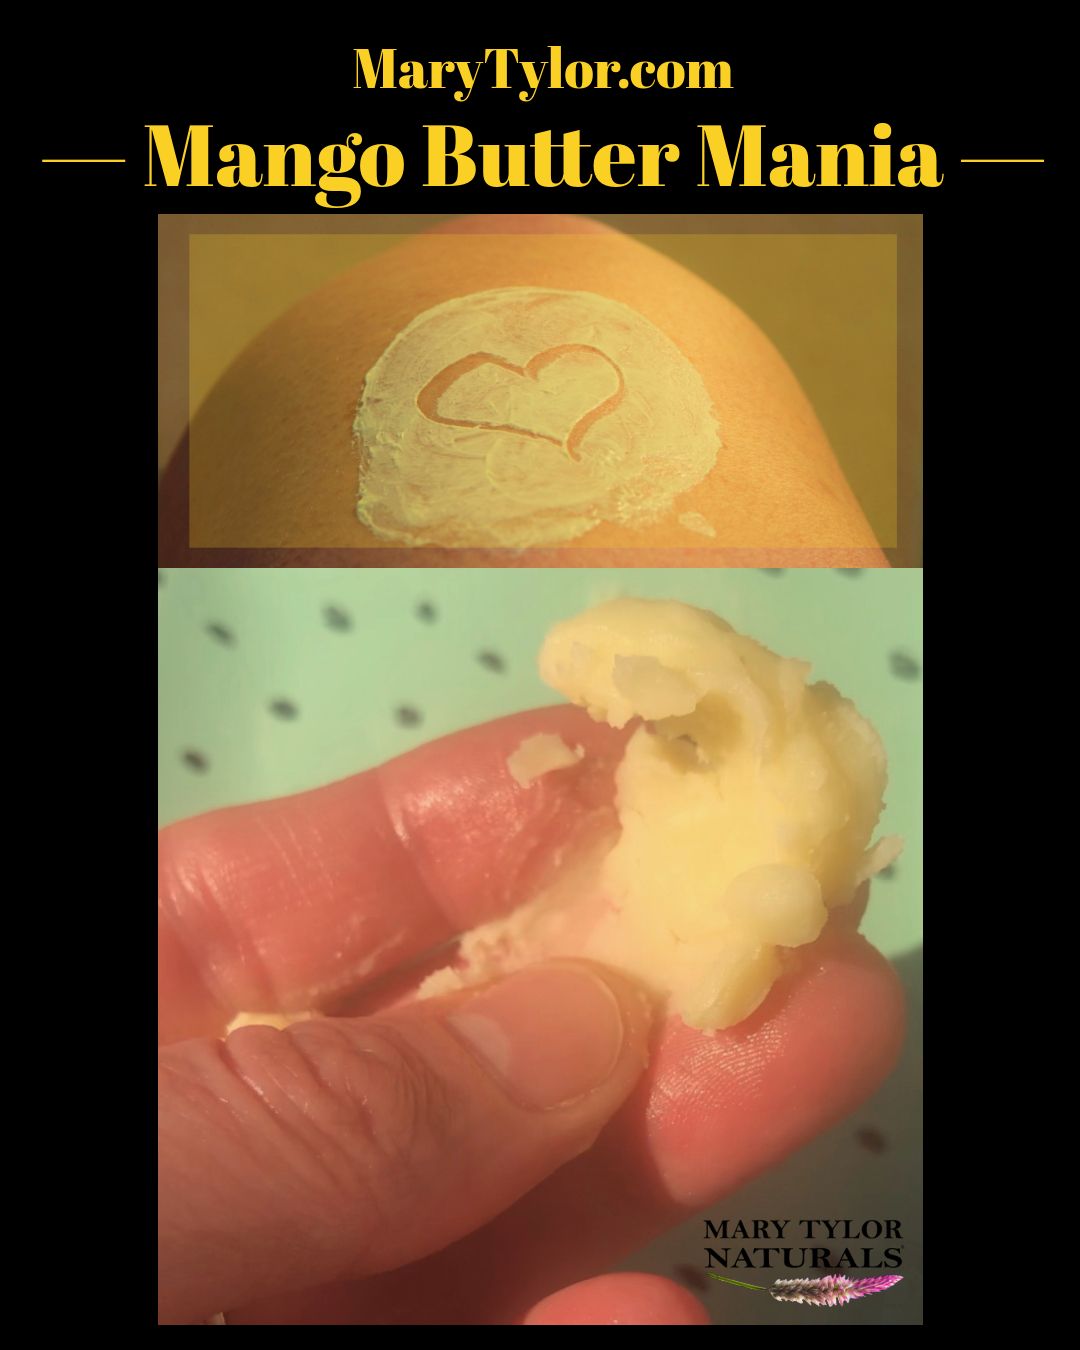 Mango Mania!  Mango Butter is all over... your skin